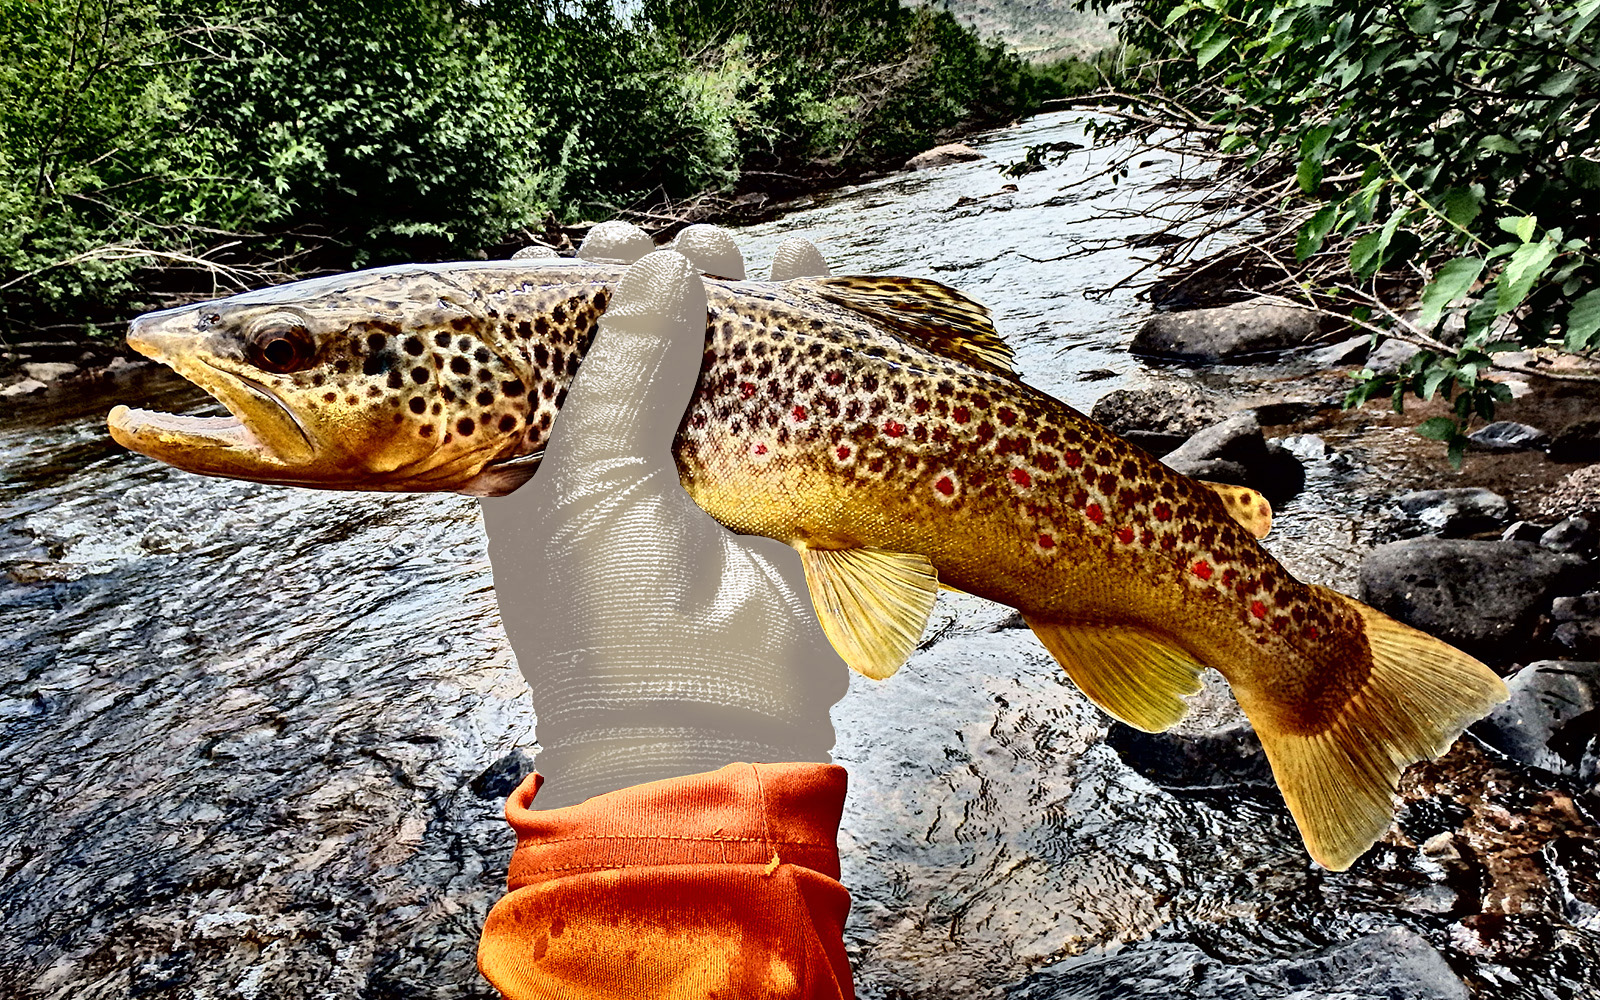 A gloved hand holds a live spotted fish caught from a stream in the background